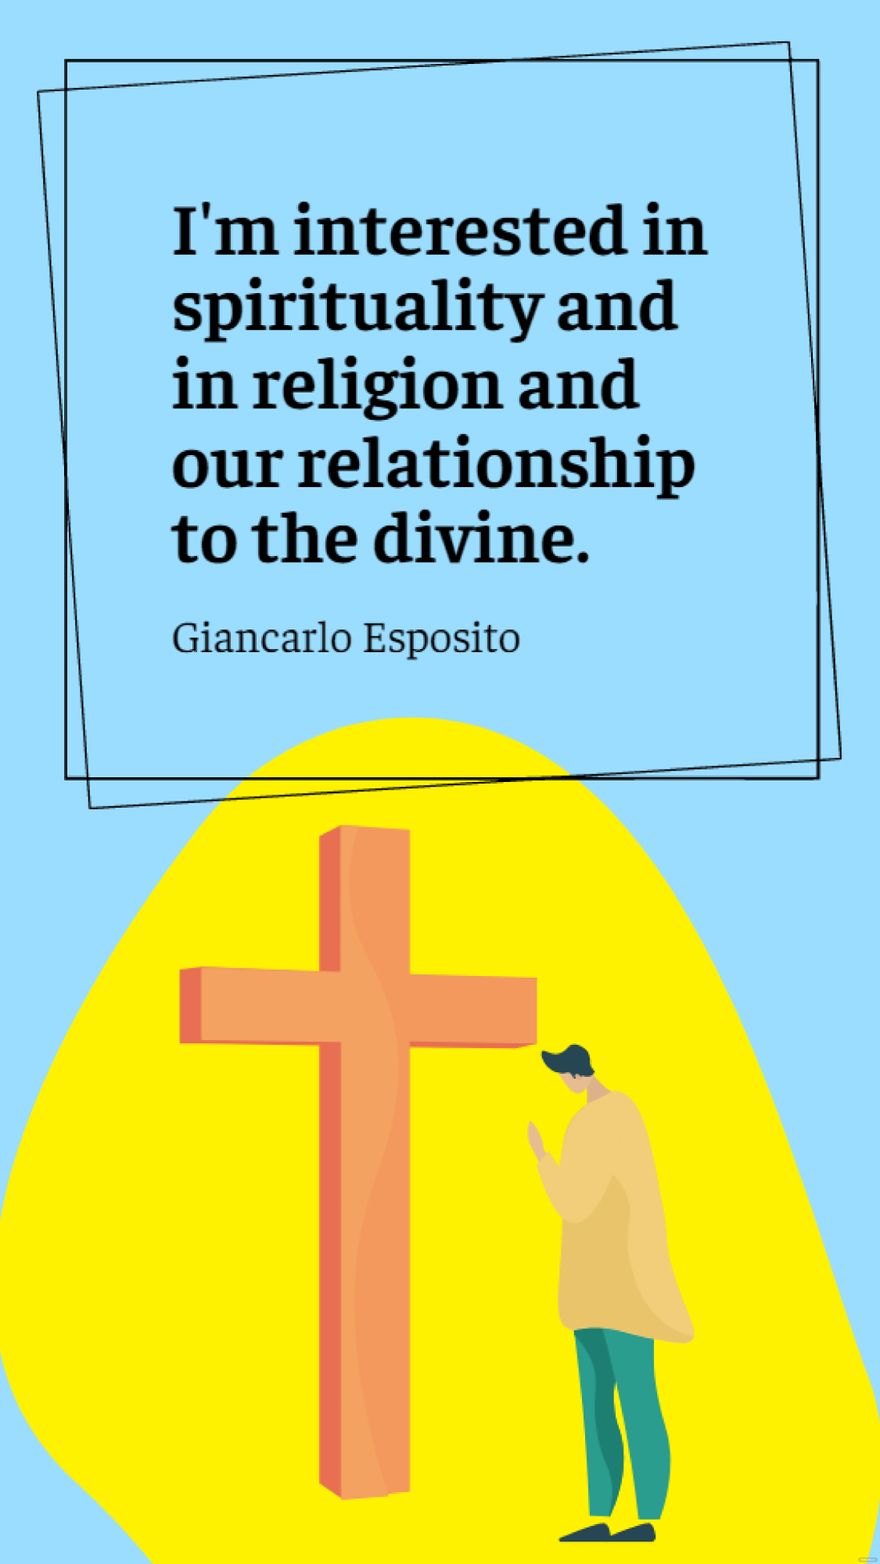 Giancarlo Esposito - I'm interested in spirituality and in religion and our relationship to the divine.